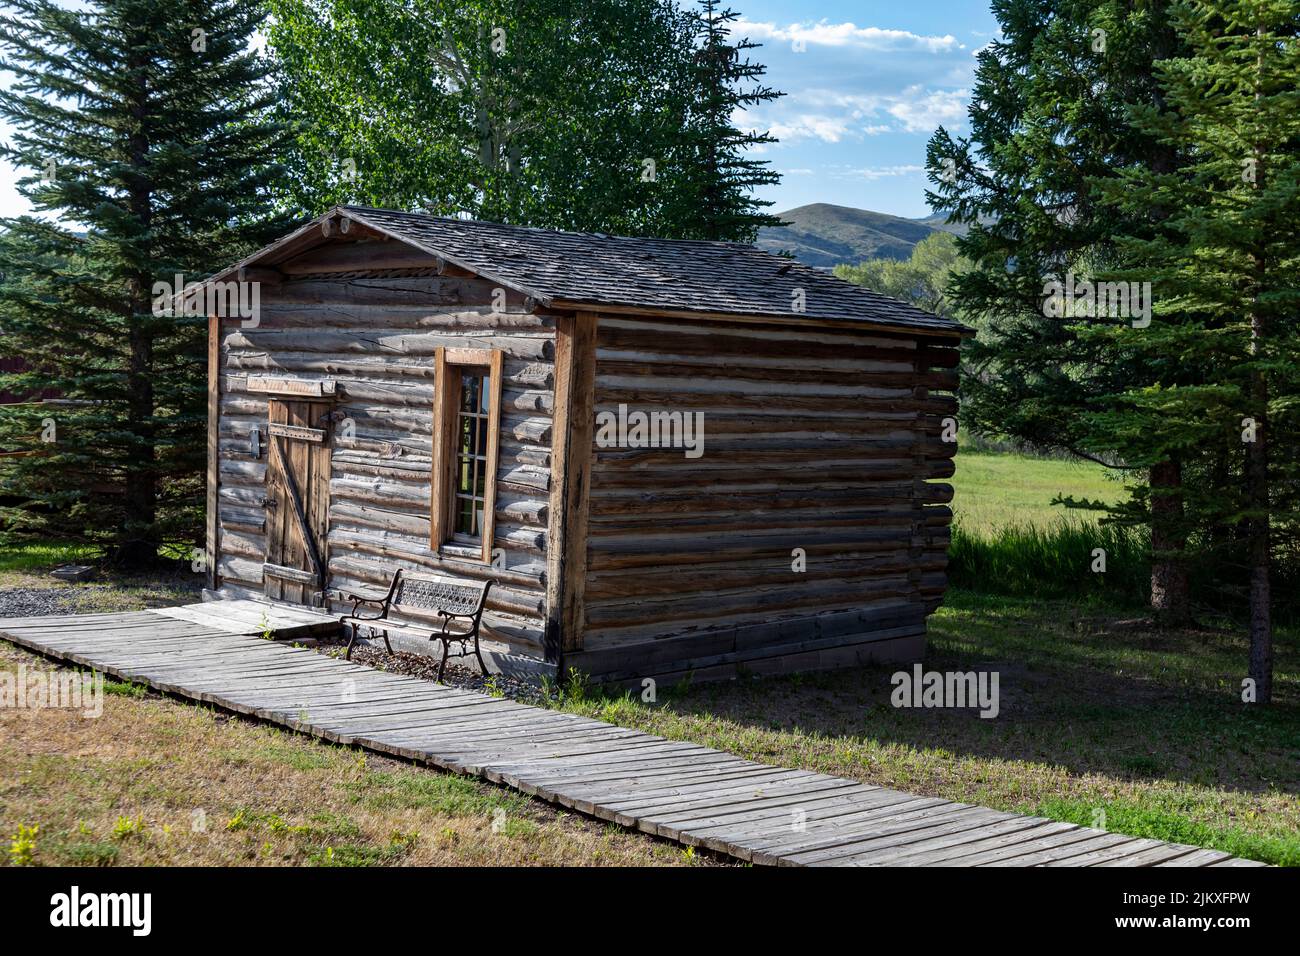 Encampment, Wyoming - The Grand Encampment Museum highlights the mining, ranching, and logging history of the town. The museum includes a one-room sch Stock Photo